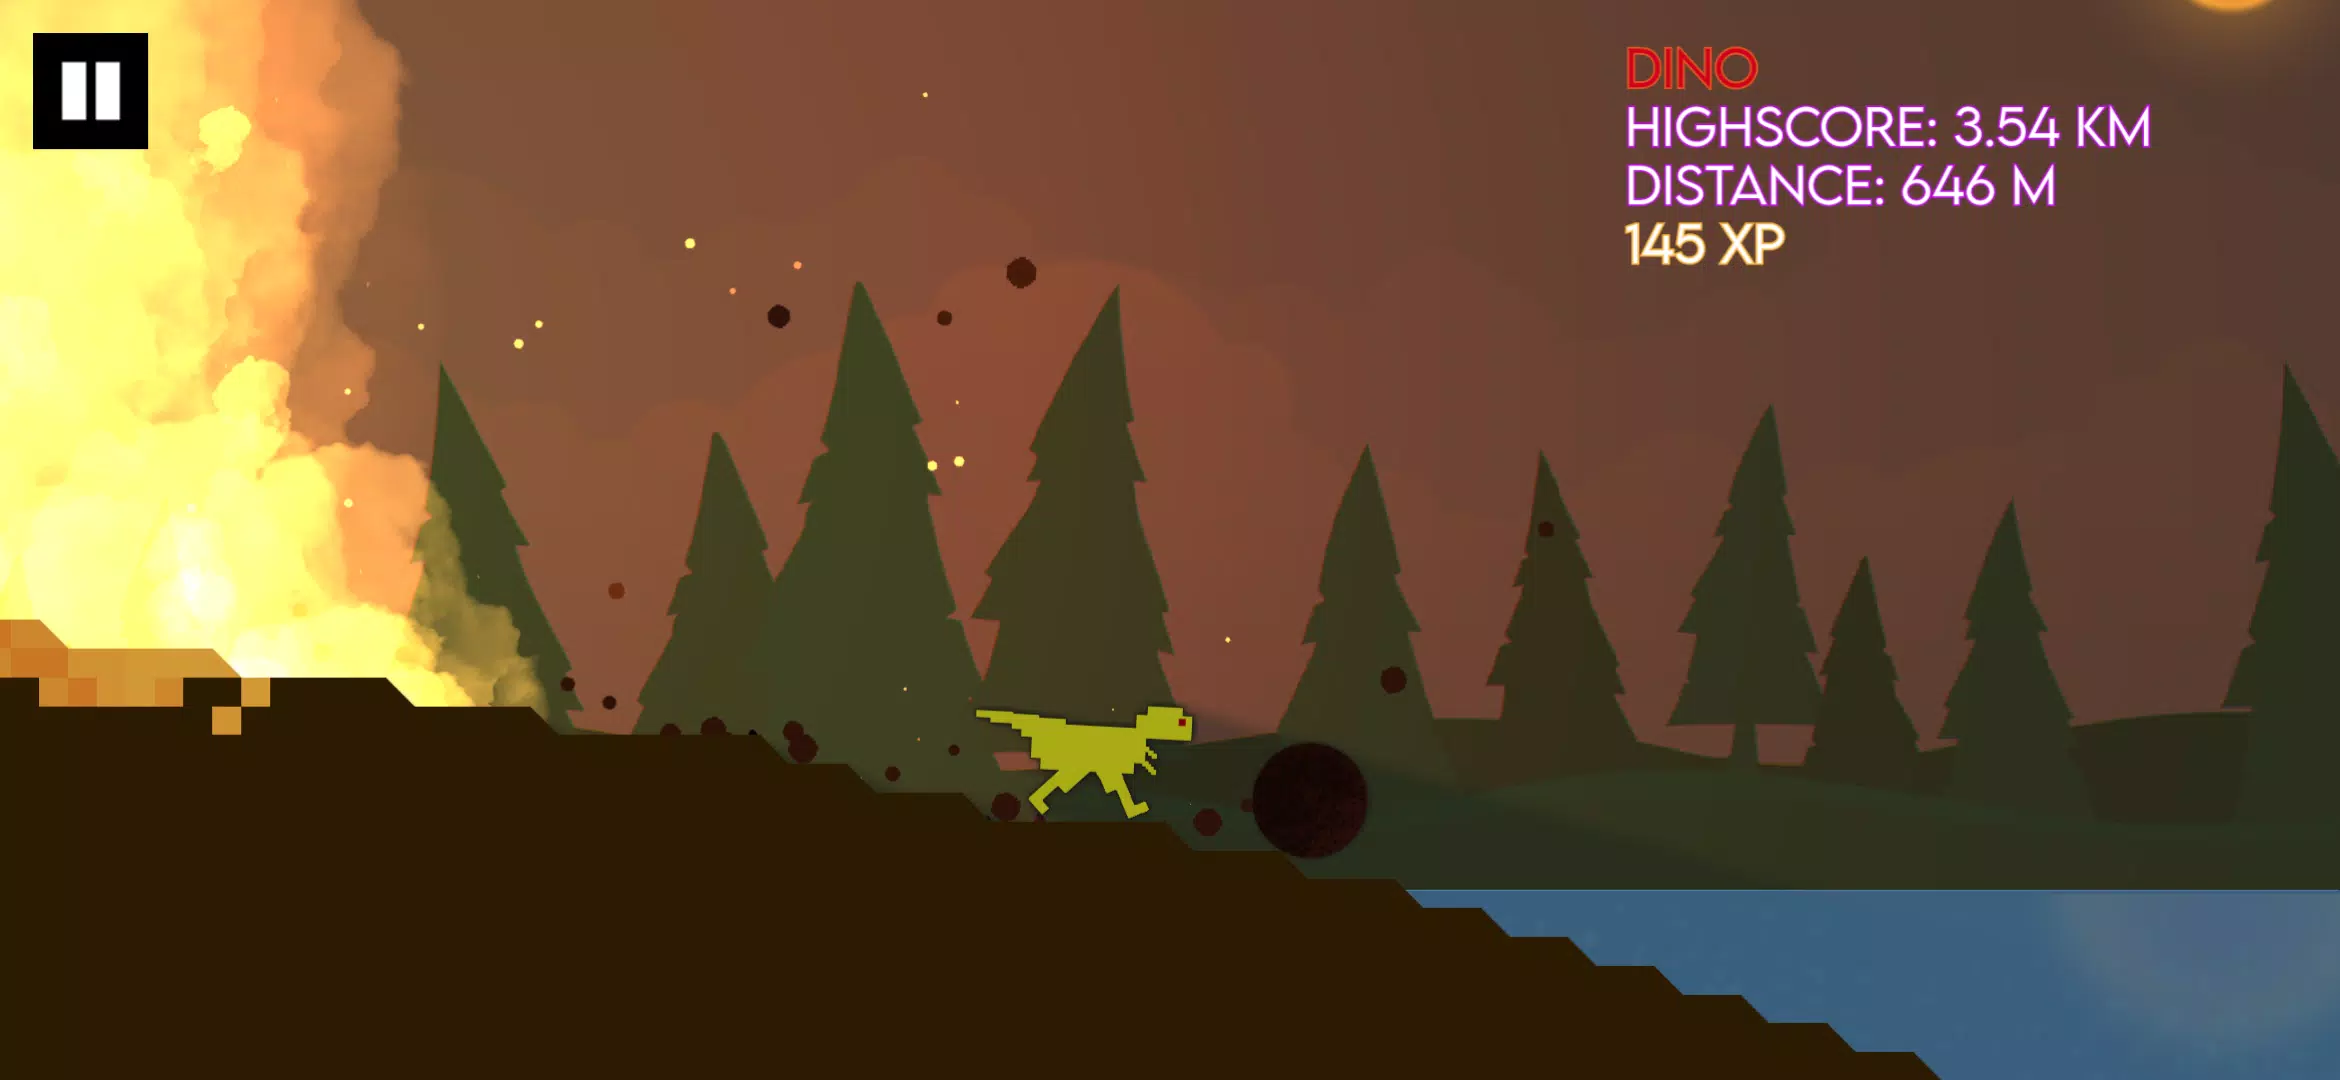 Dino Run DX : How To Get This Game For FREE!